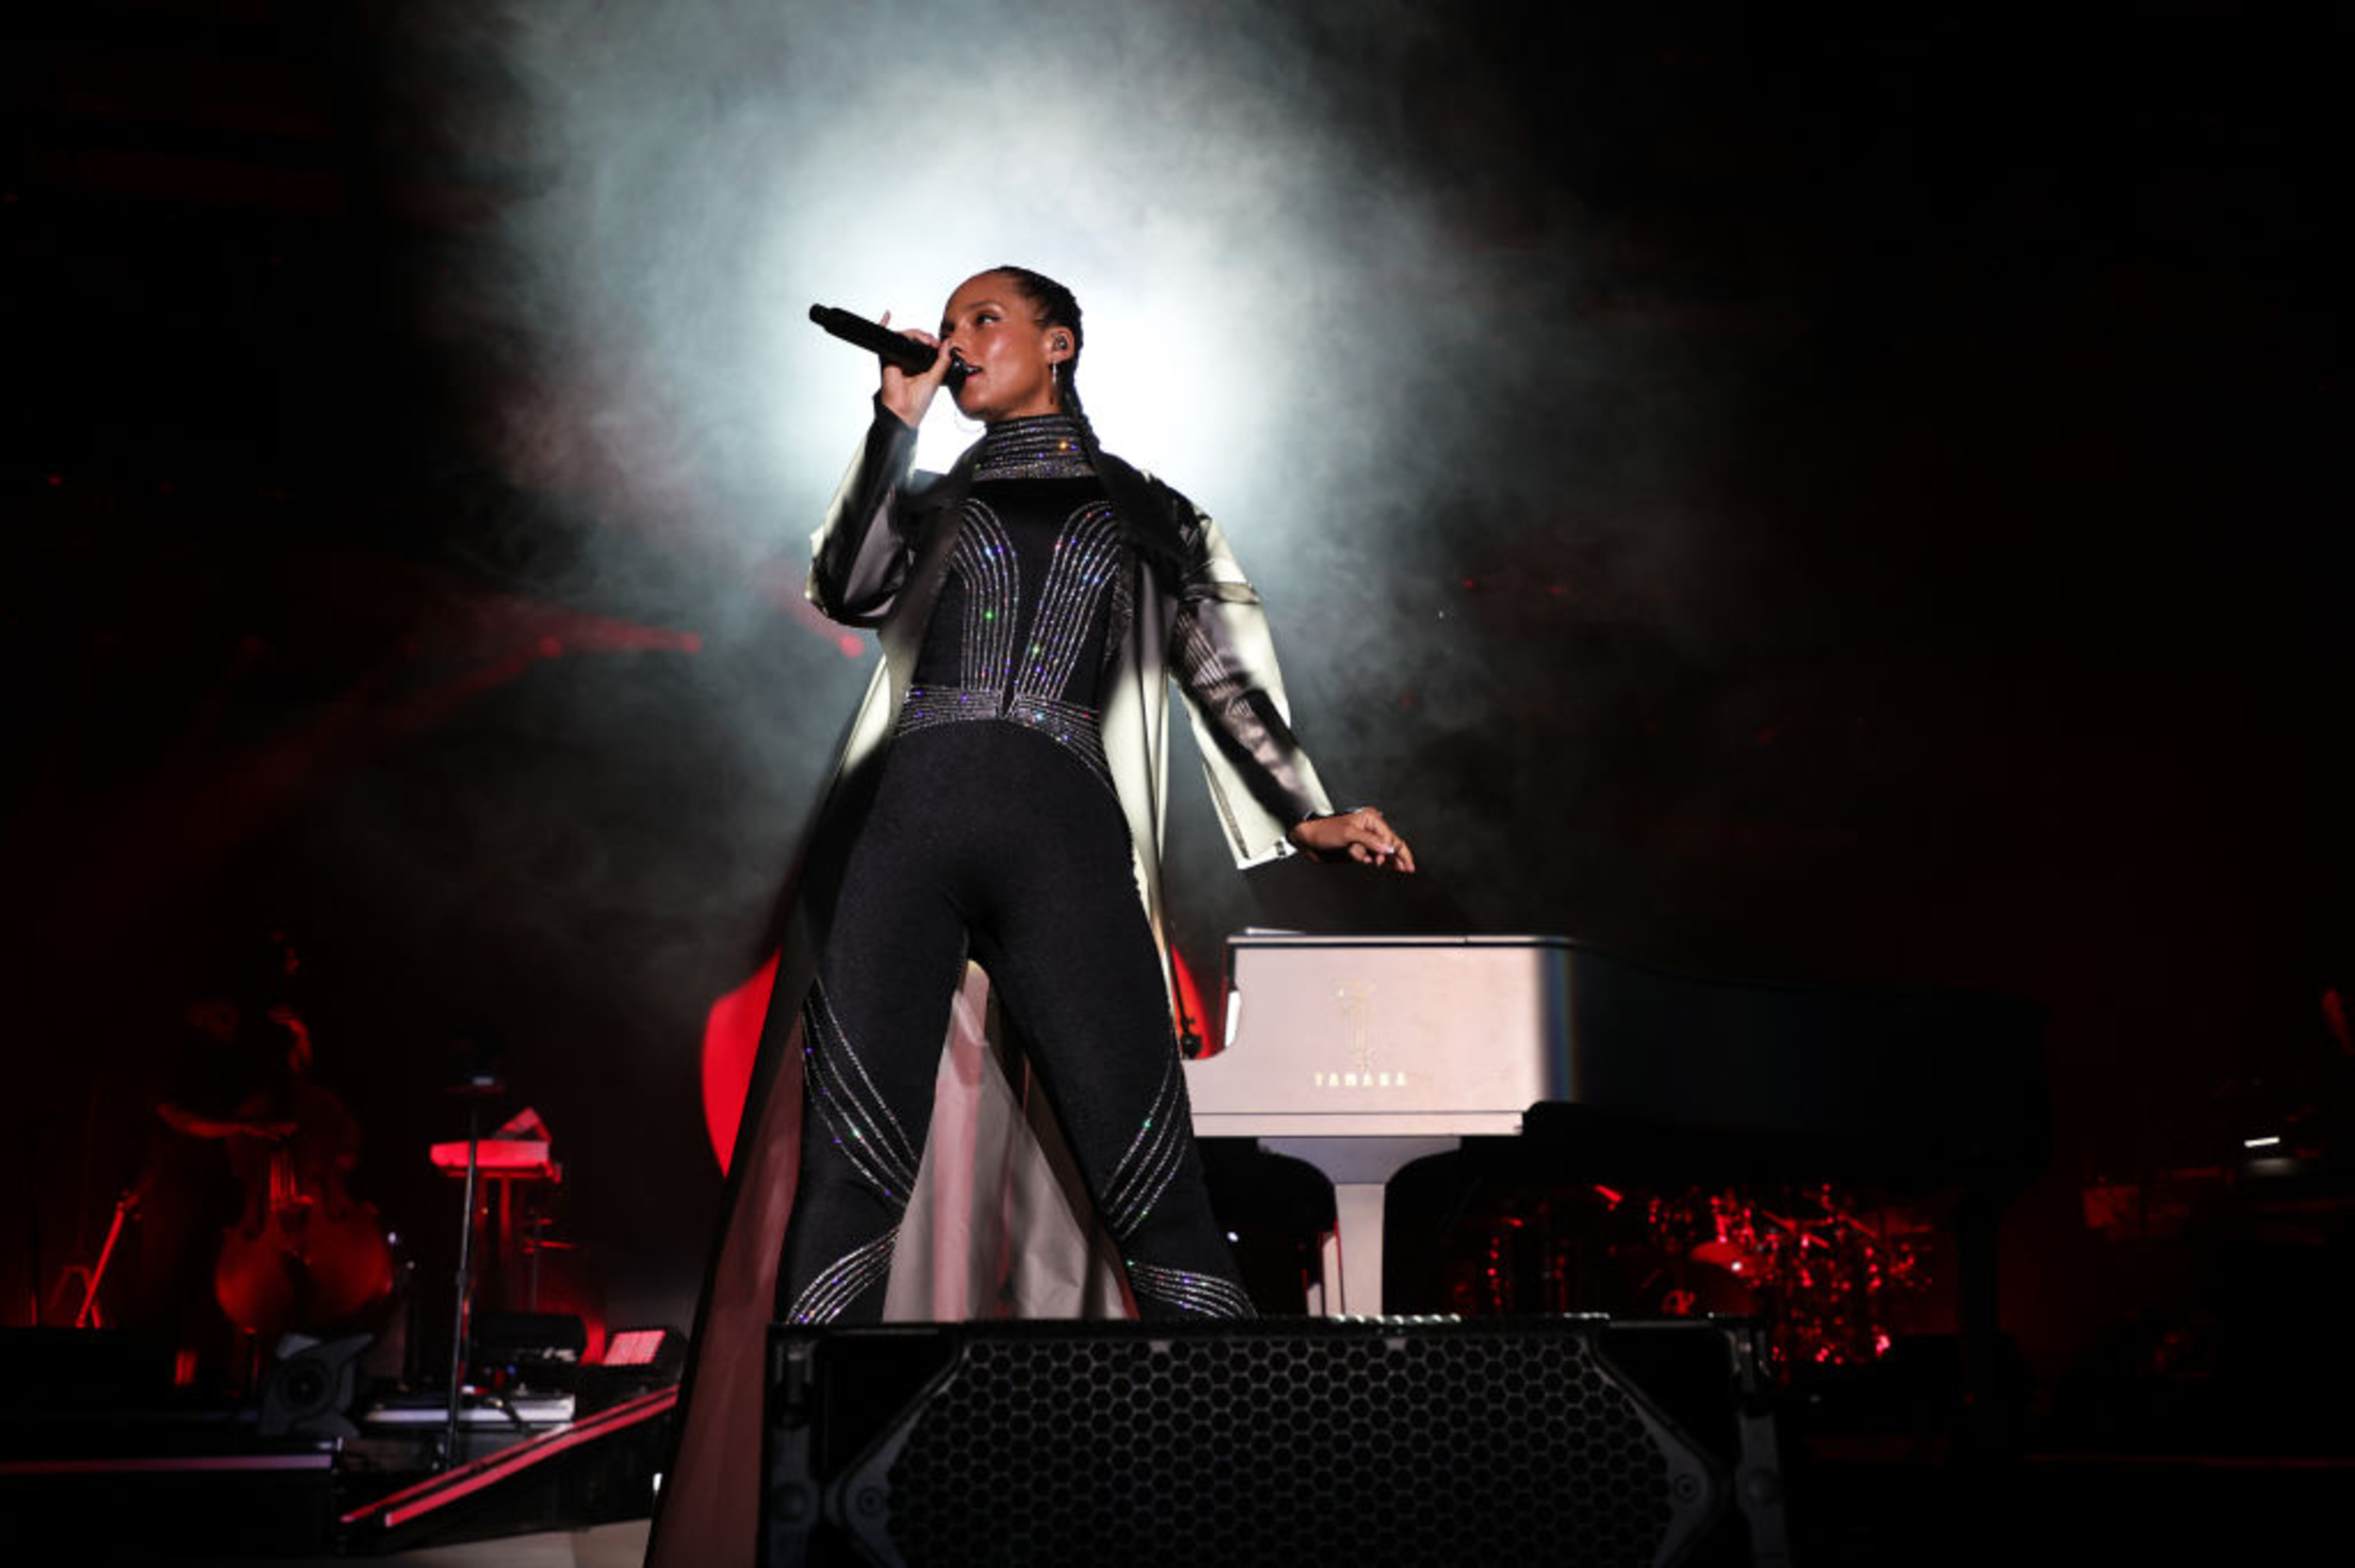 <p>On Alicia Keys’ debut single “Fallin,’” the singer highlights how people fall in and out love, and how it can take the toll on a person’s emotions. She stresses that people can be either head over heels with someone one day, and then can’t stand the sight of their face the next day. Her stance is evident throughout the track as she sings, "I keep on fallin' in and out of love with you / Sometimes I love ya, sometimes you make me blue." </p><p><a href='https://www.msn.com/en-us/community/channel/vid-cj9pqbr0vn9in2b6ddcd8sfgpfq6x6utp44fssrv6mc2gtybw0us'>Follow us on MSN to see more of our exclusive entertainment content.</a></p>